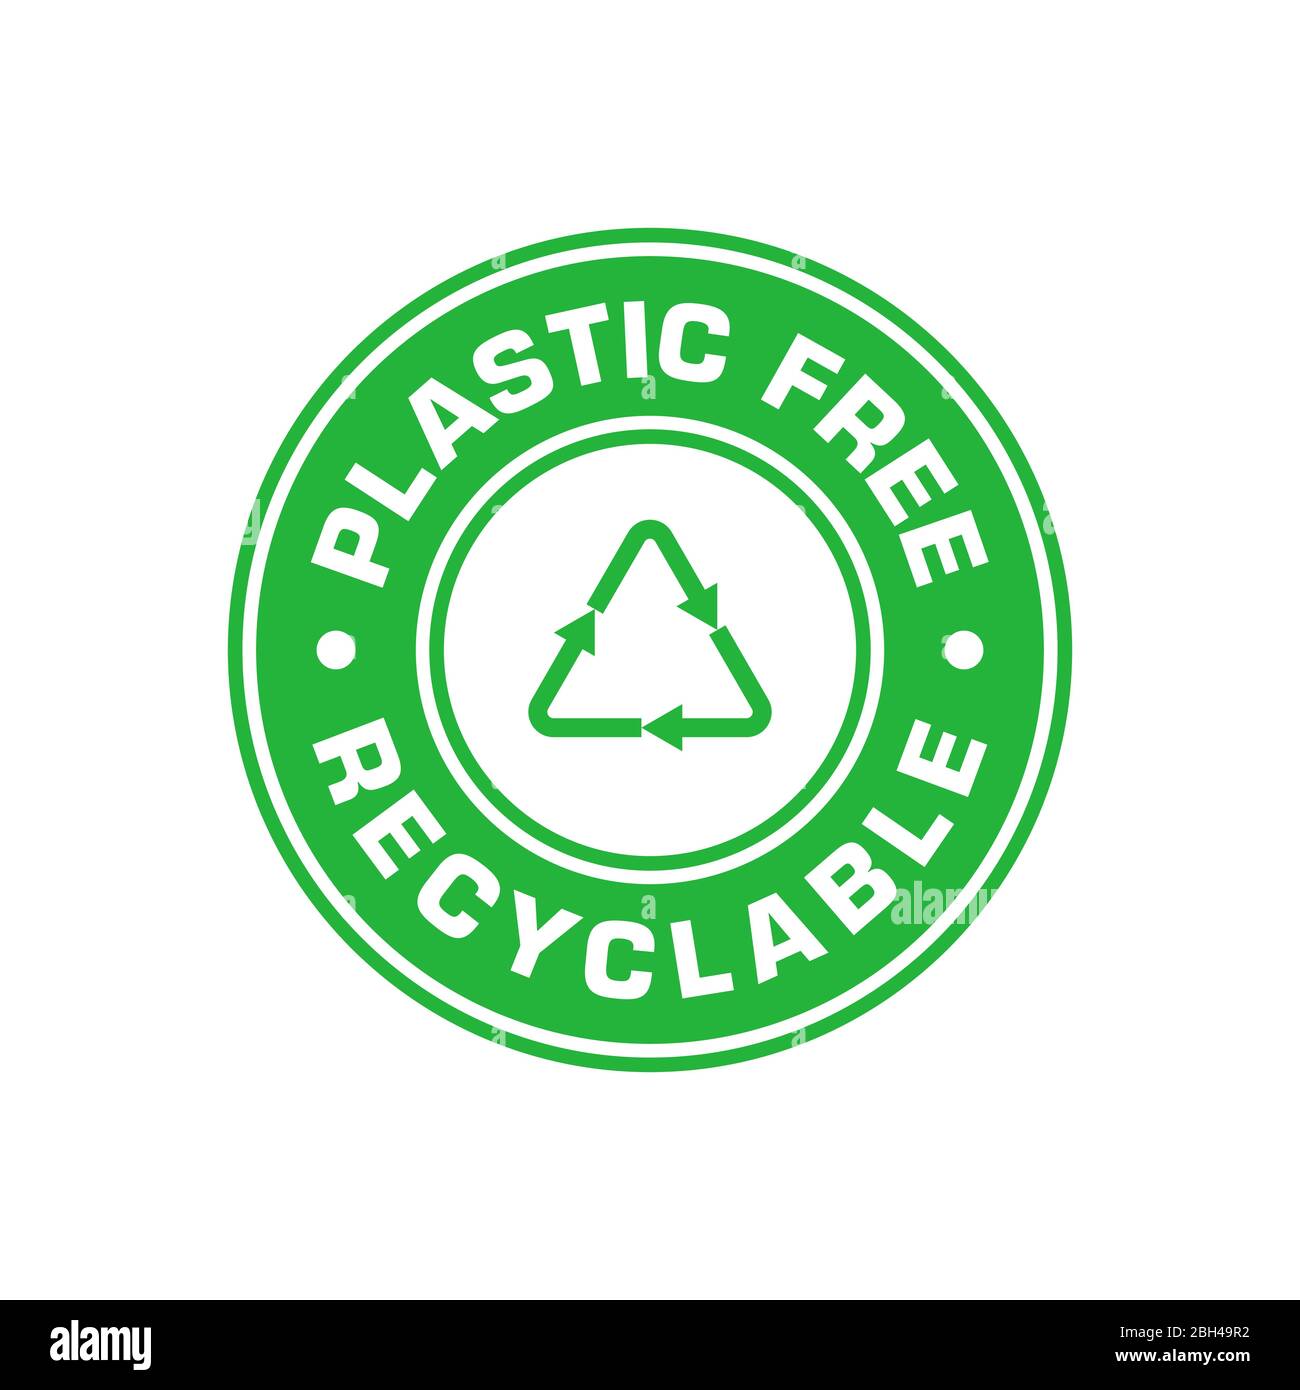 Plastic free green emblem, Recyclable. Recycle triangle. Vector illustration. Stock Vector